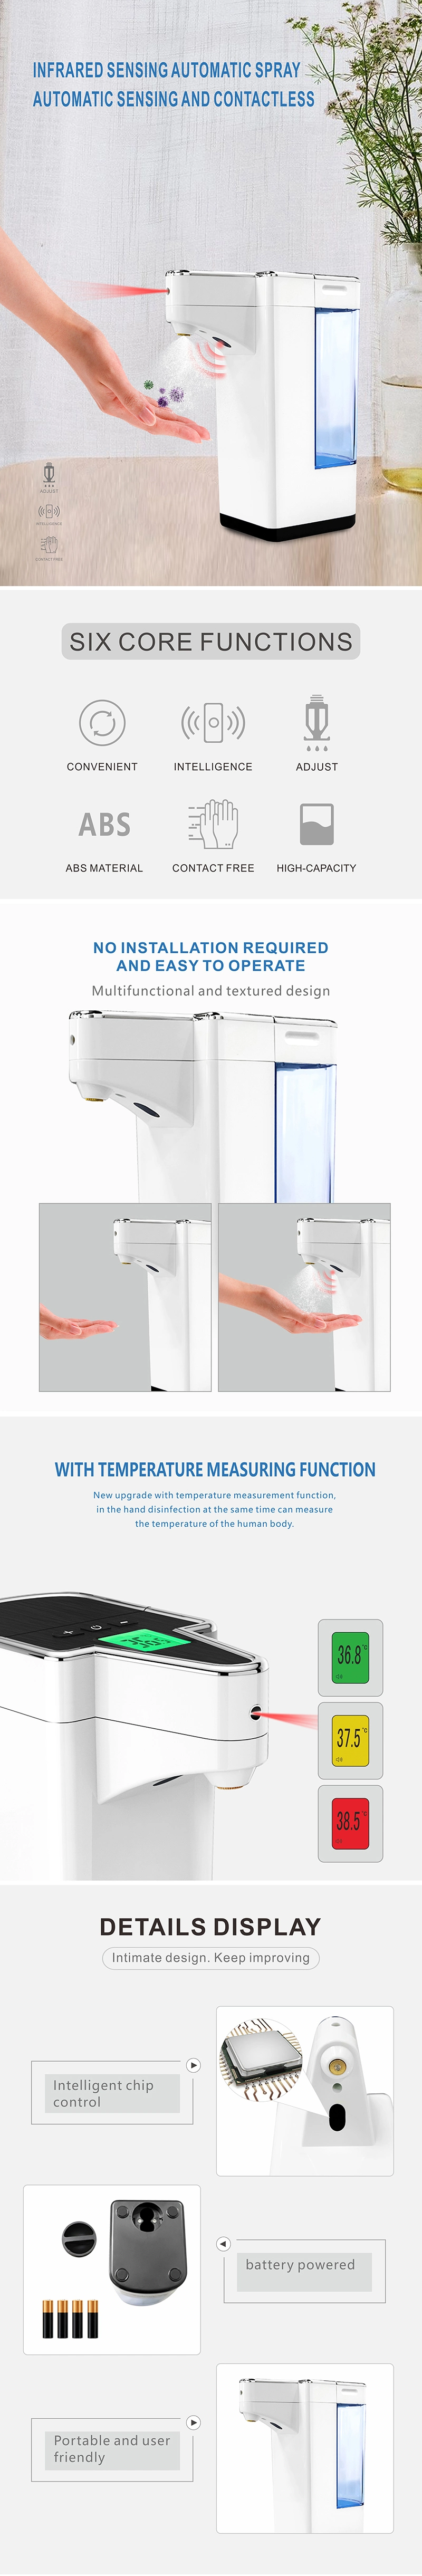 Unique Large Capacity Battery Powered Sterilization and Disinfection Table Soap Dispenser